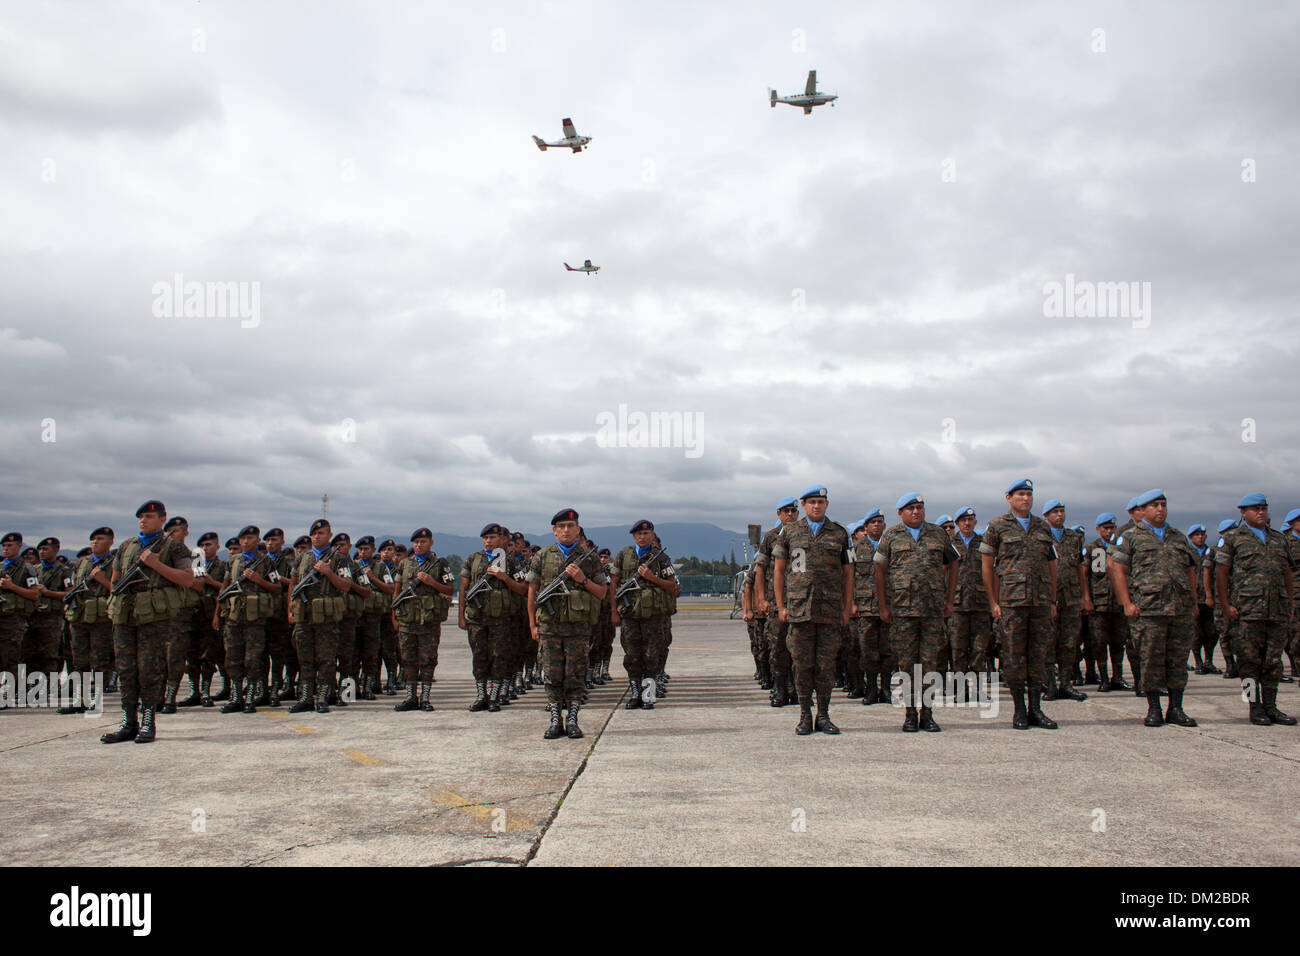 Guatemala City, Guatemala. 10th Dec, 2013. Soldiers of the Guatemalan Army participate in a parade to commemorate the 92nd anniversary of the Guatemalan Air Force, in Guatemala City, capital of Guatemala, on Dec. 10, 2013. Credit:  Luis Echeverria/Xinhua/Alamy Live News Stock Photo